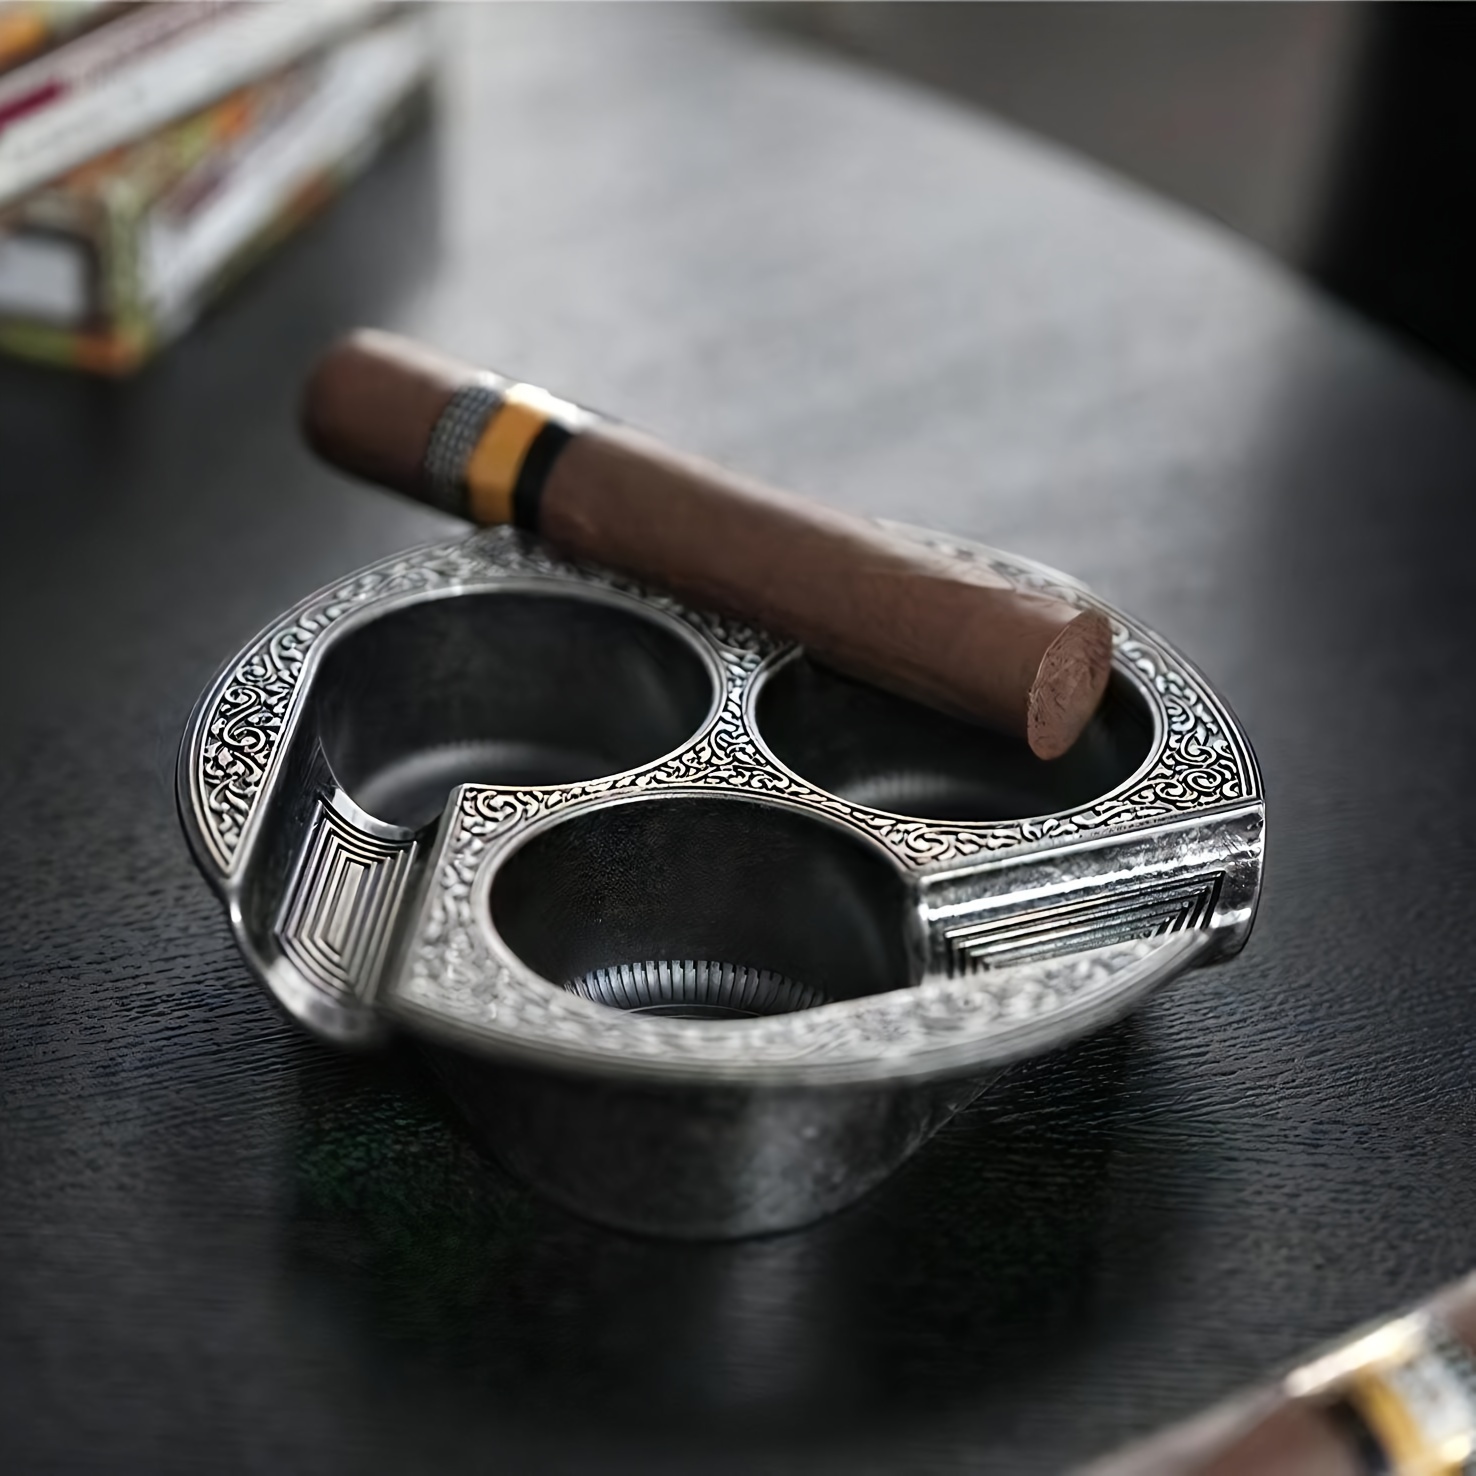 Smart Ashtray Removes Second-hand Smoke The Smell Of Tobacco Disappears In  An Instant, USB Portable Ashtray, A Gift For Men